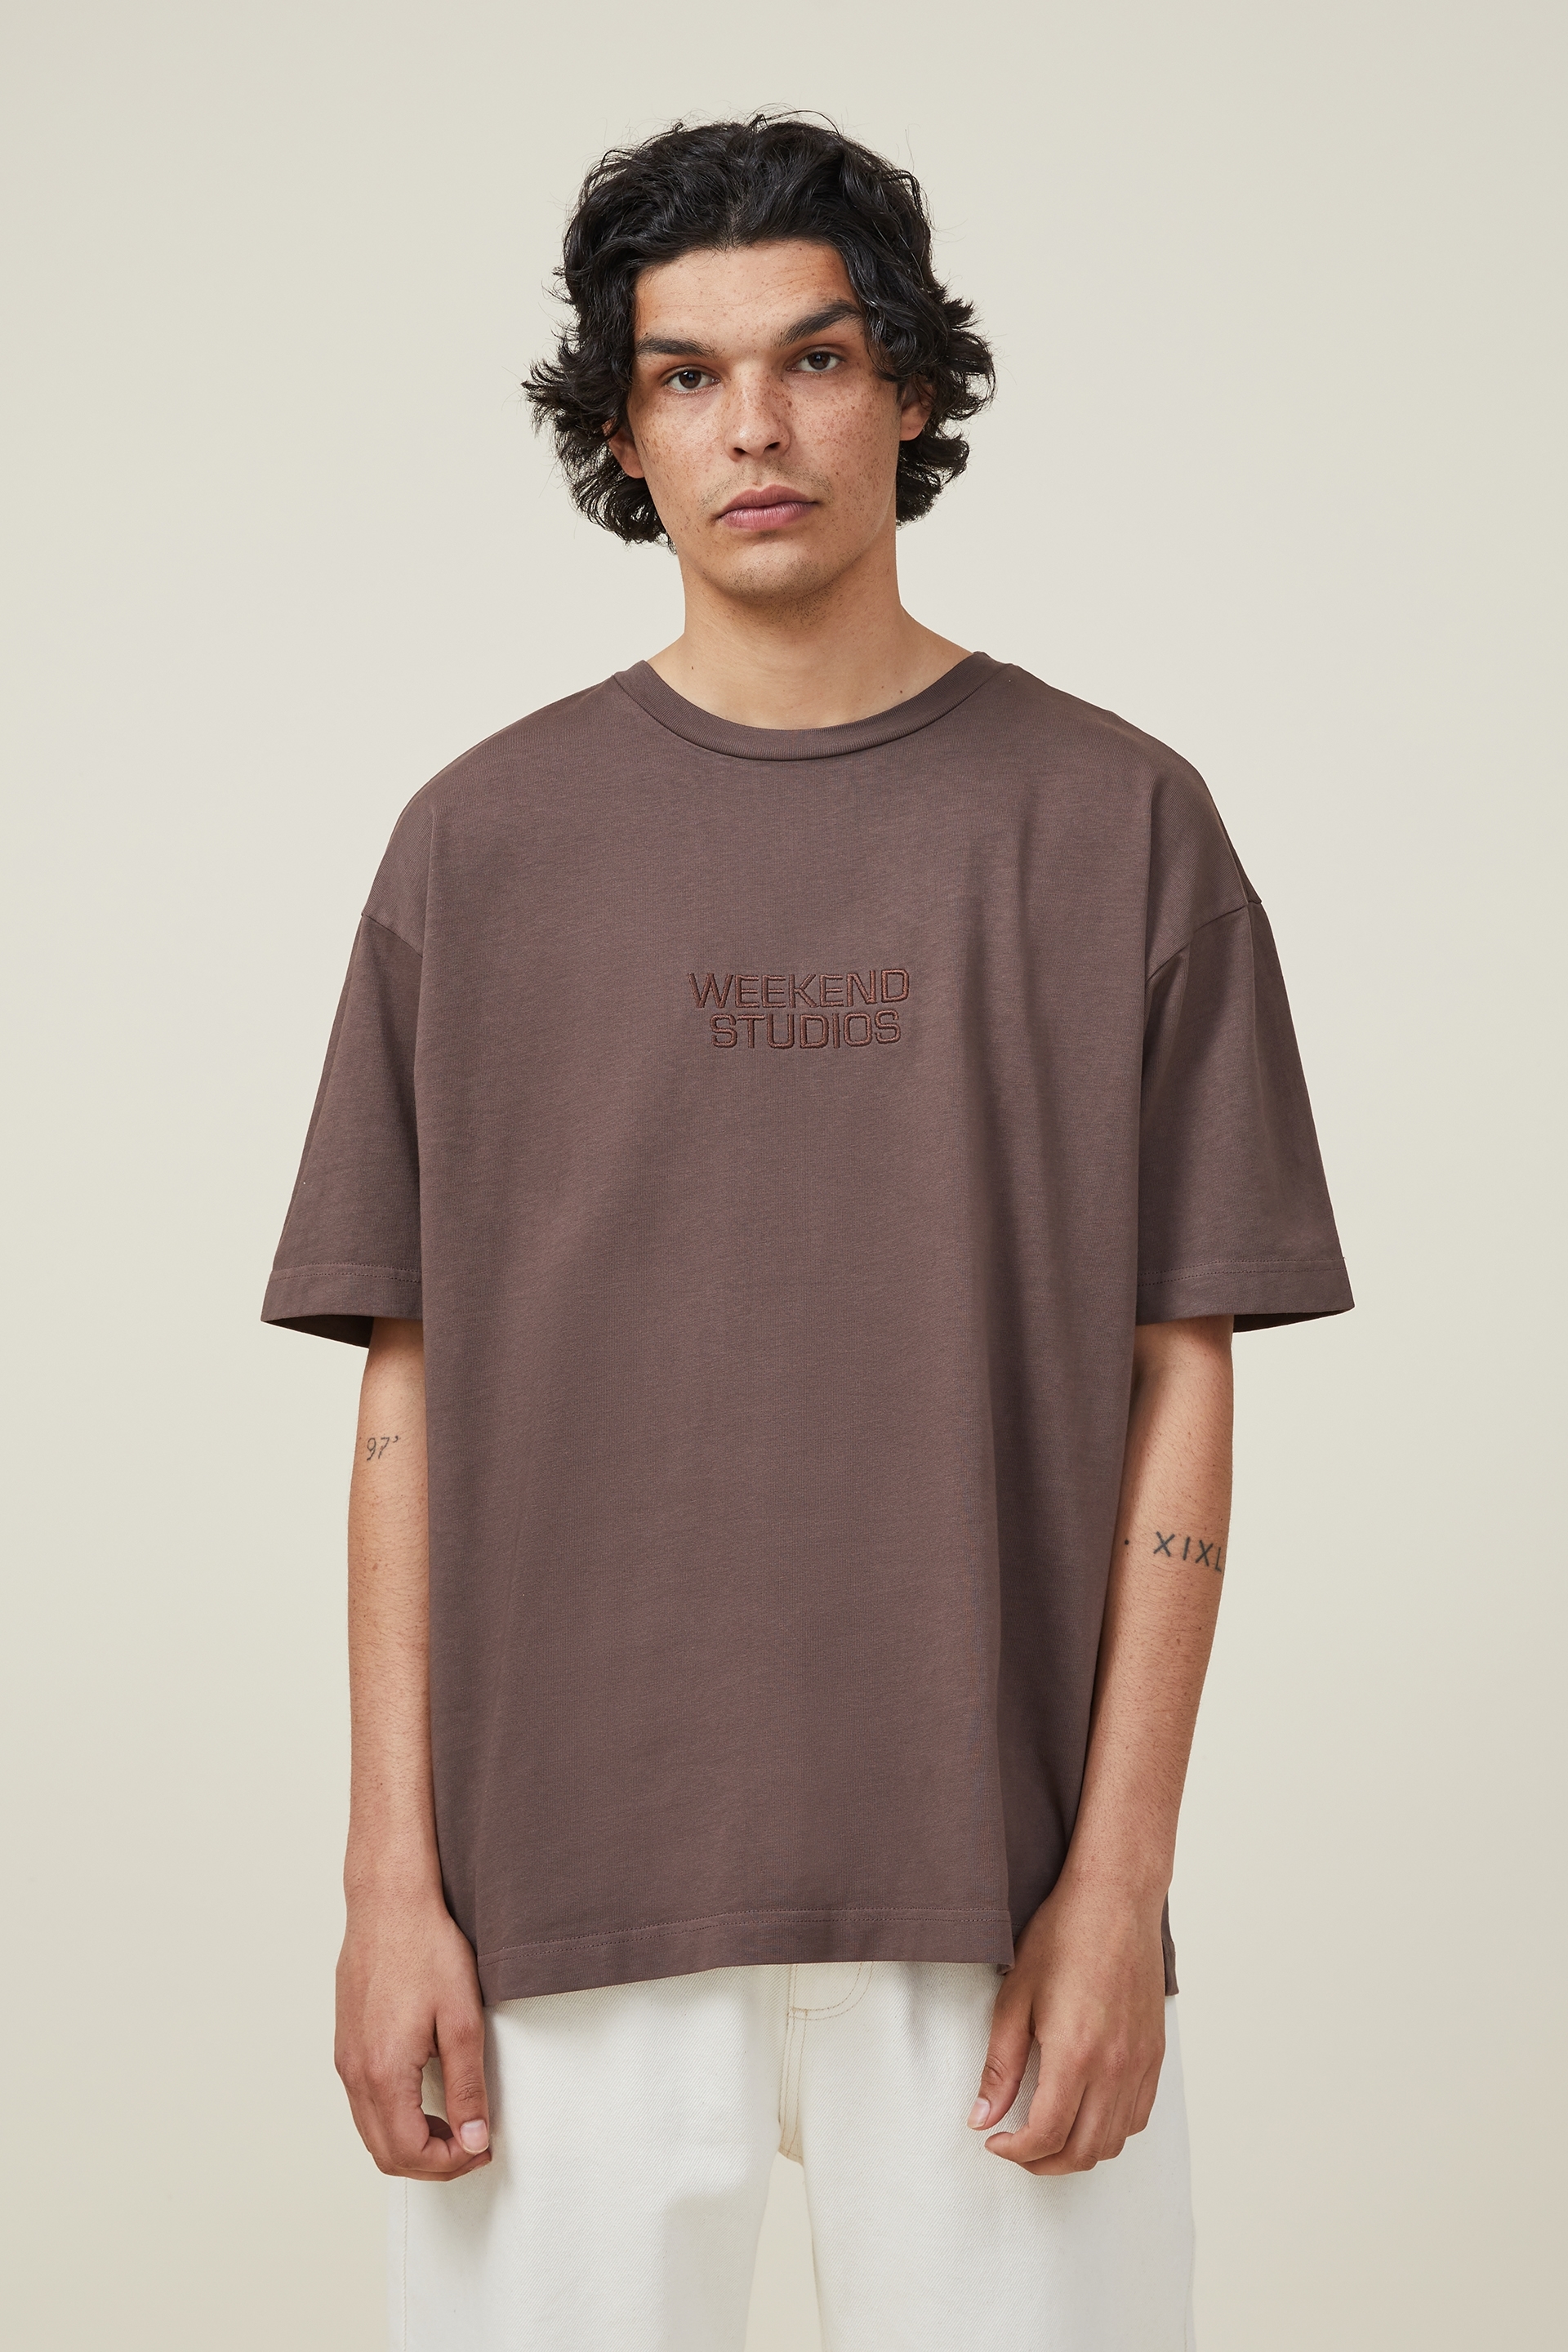 Cotton On Men - Box Fit Plain T-Shirt - Washed chocolate/weekend studio stack